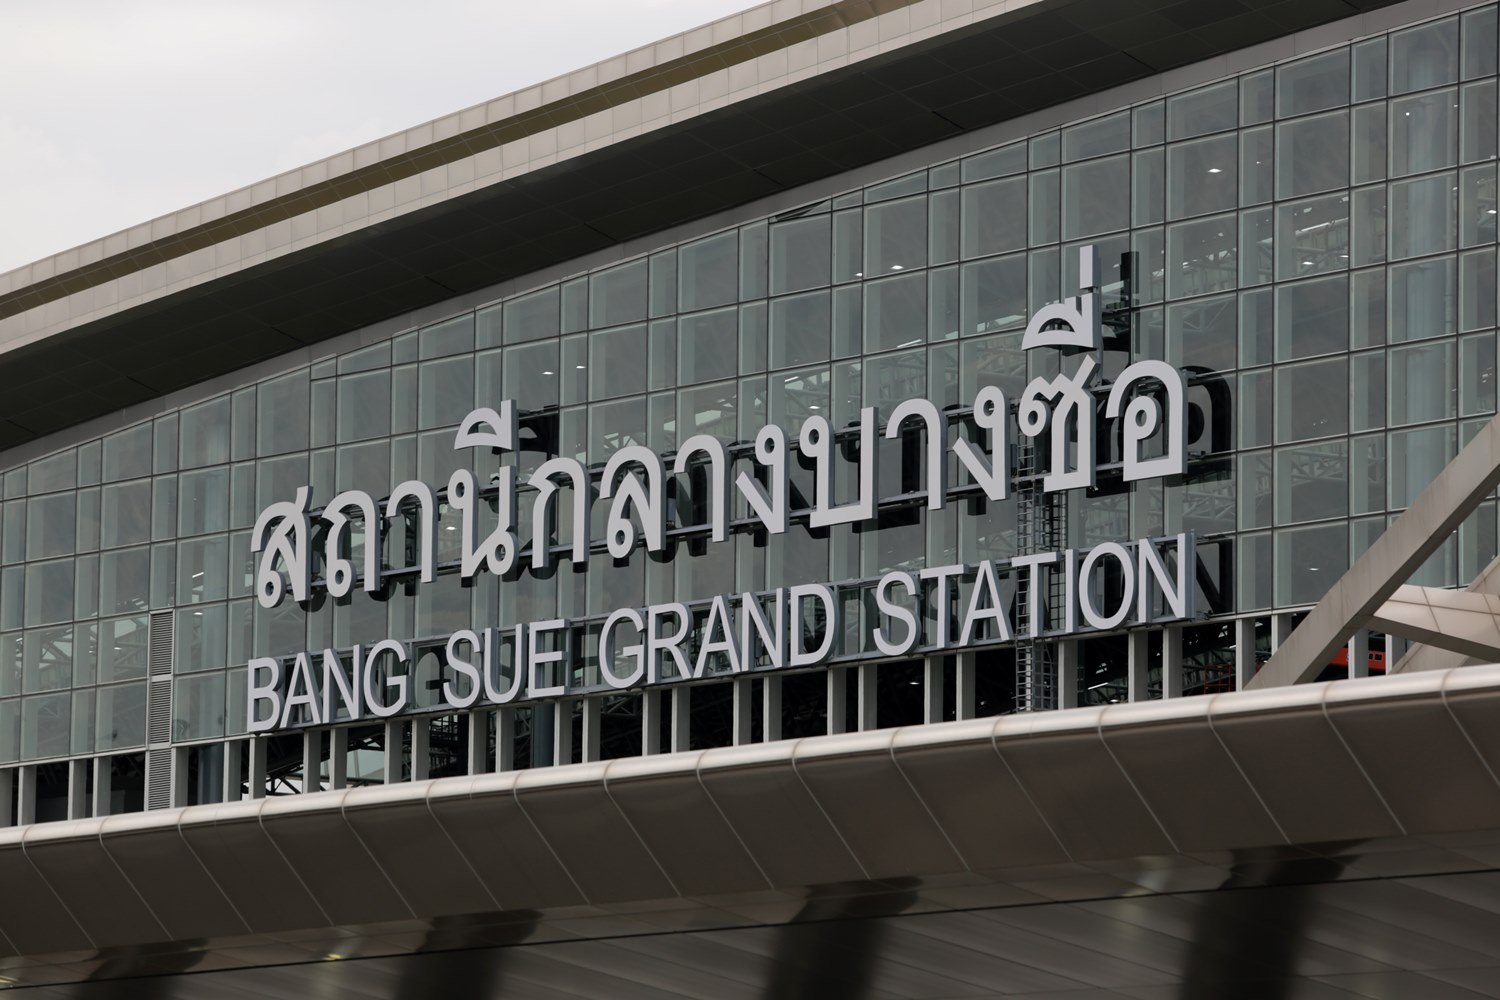 Bang Sue Grand Station – The largest railway station in Southeast Asia